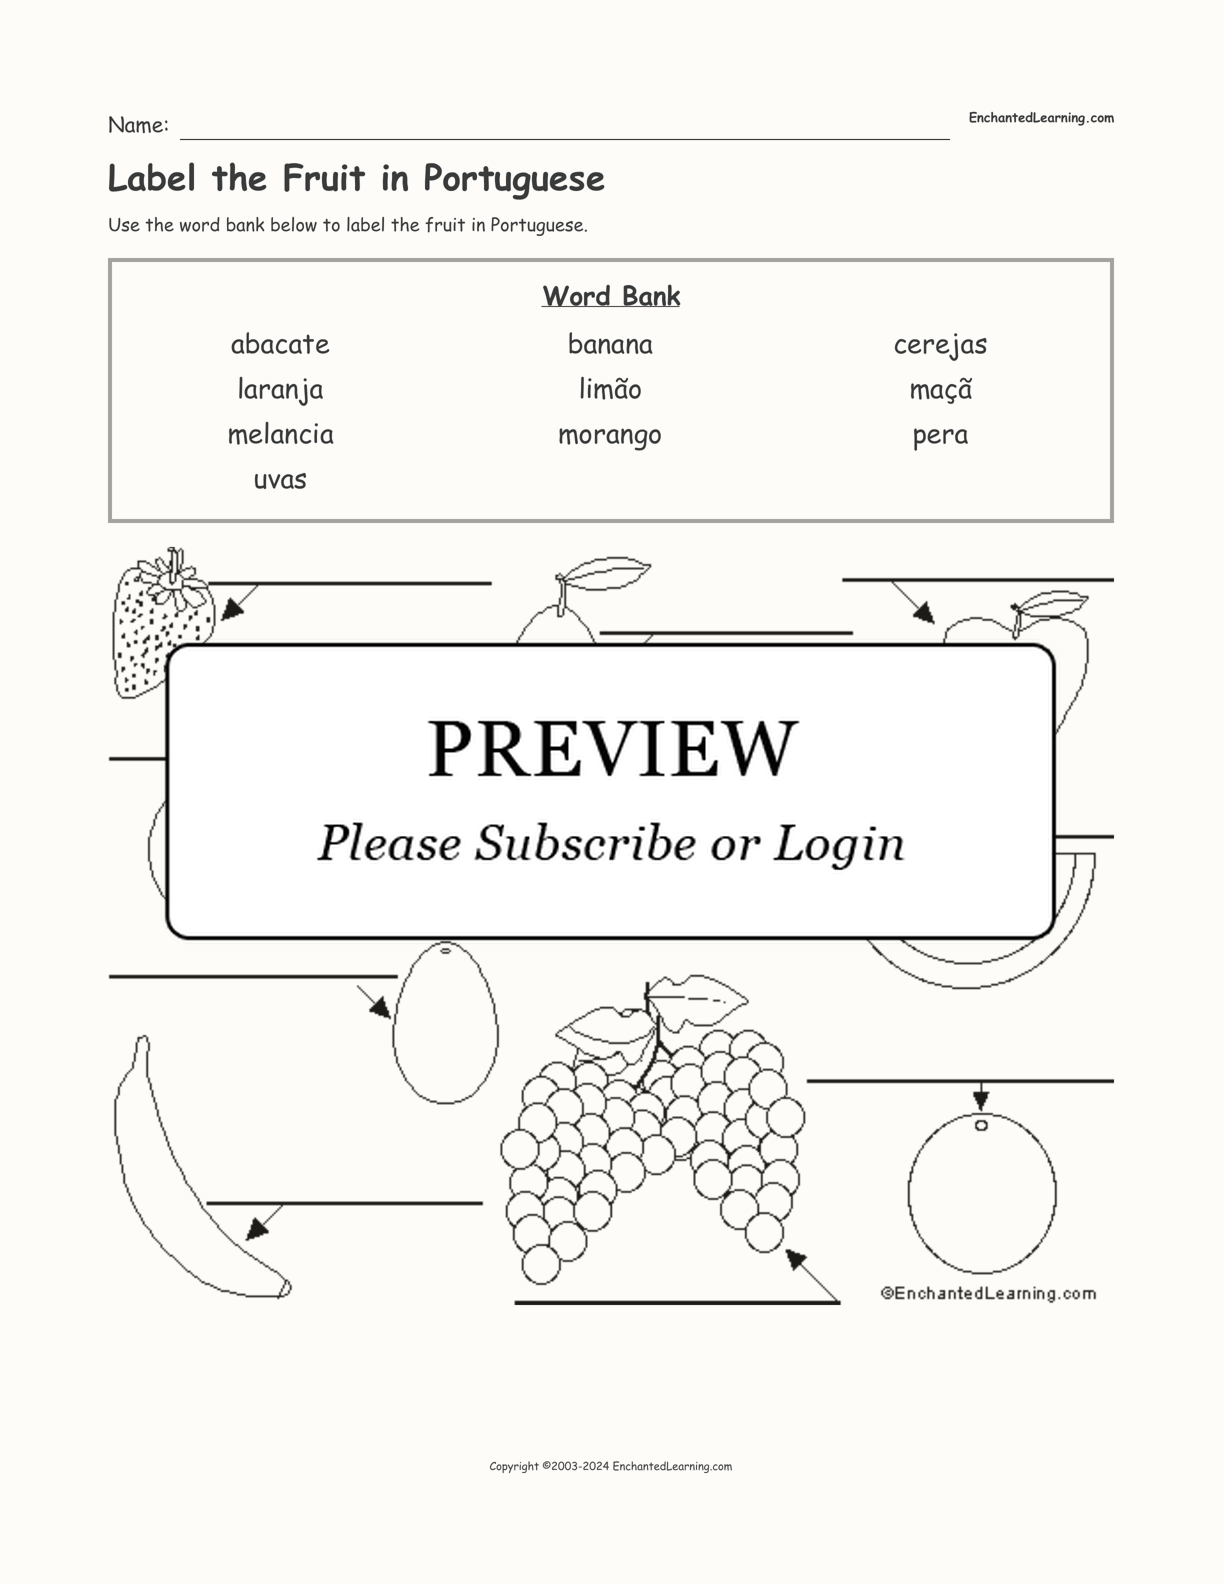 Label the Fruit in Portuguese interactive worksheet page 1